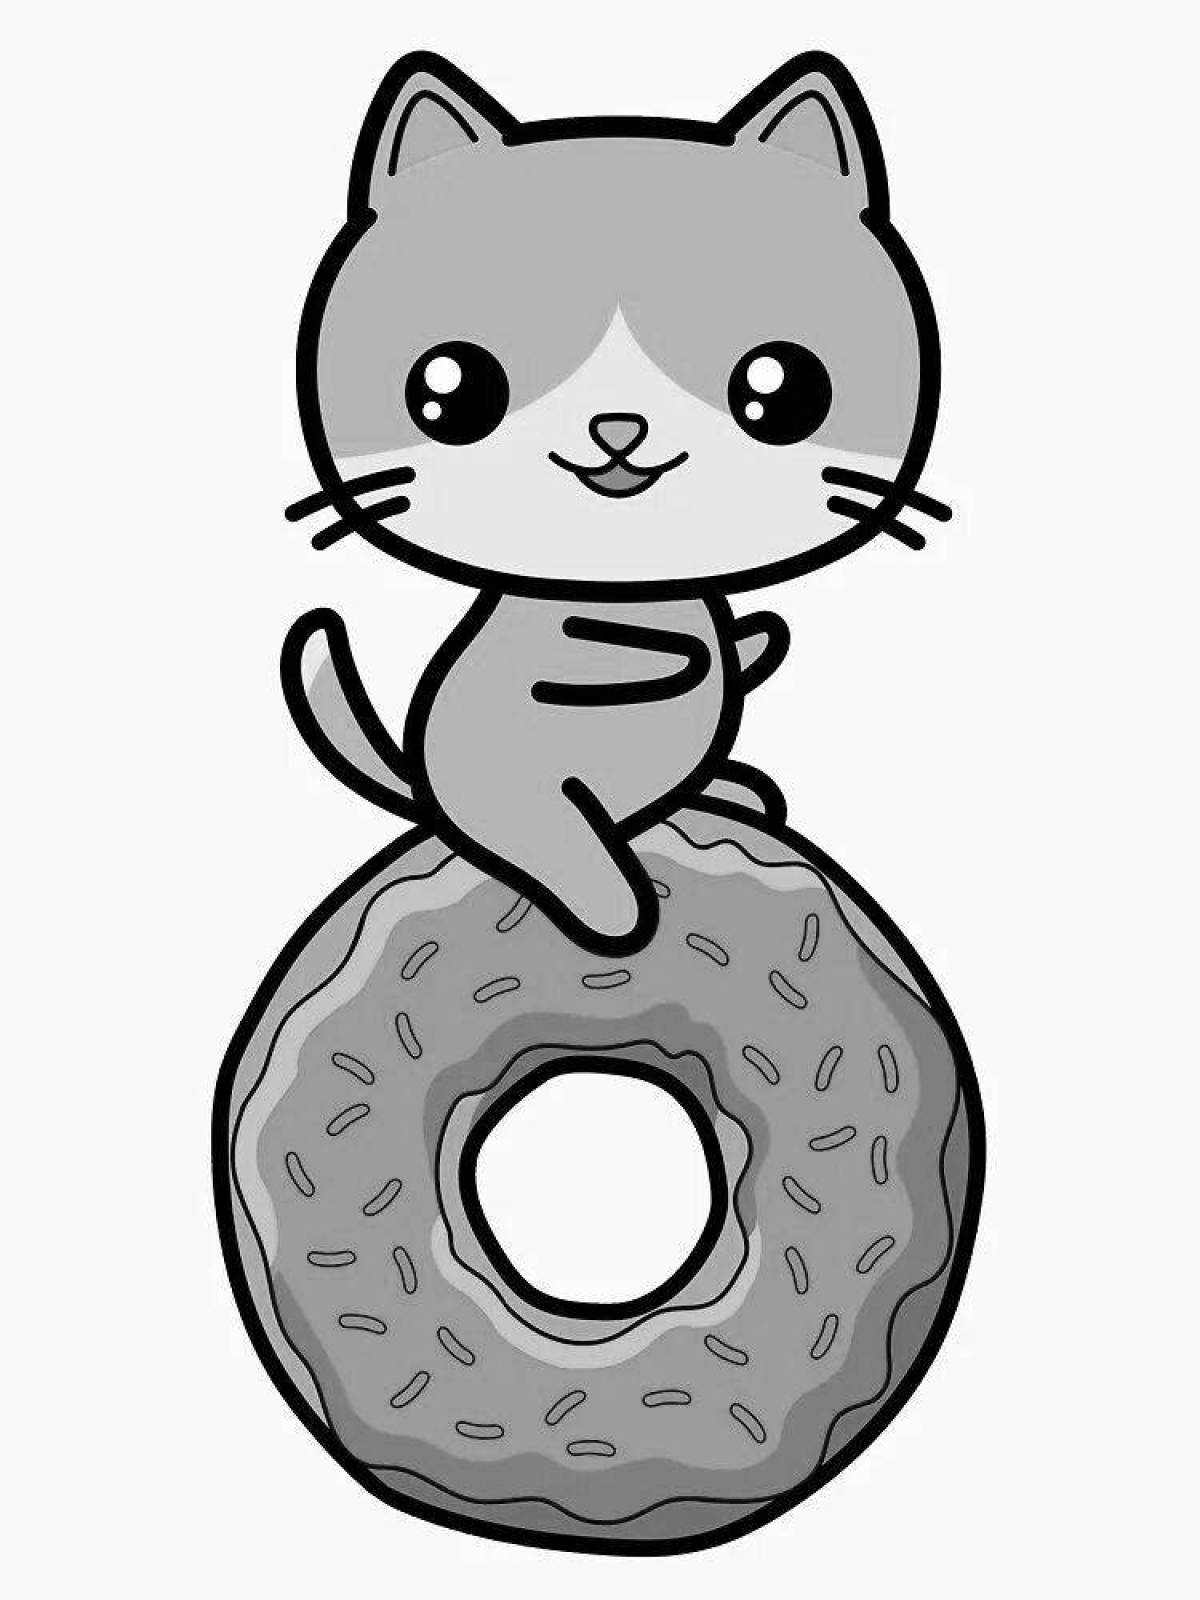 Coloring book shiny donut cat